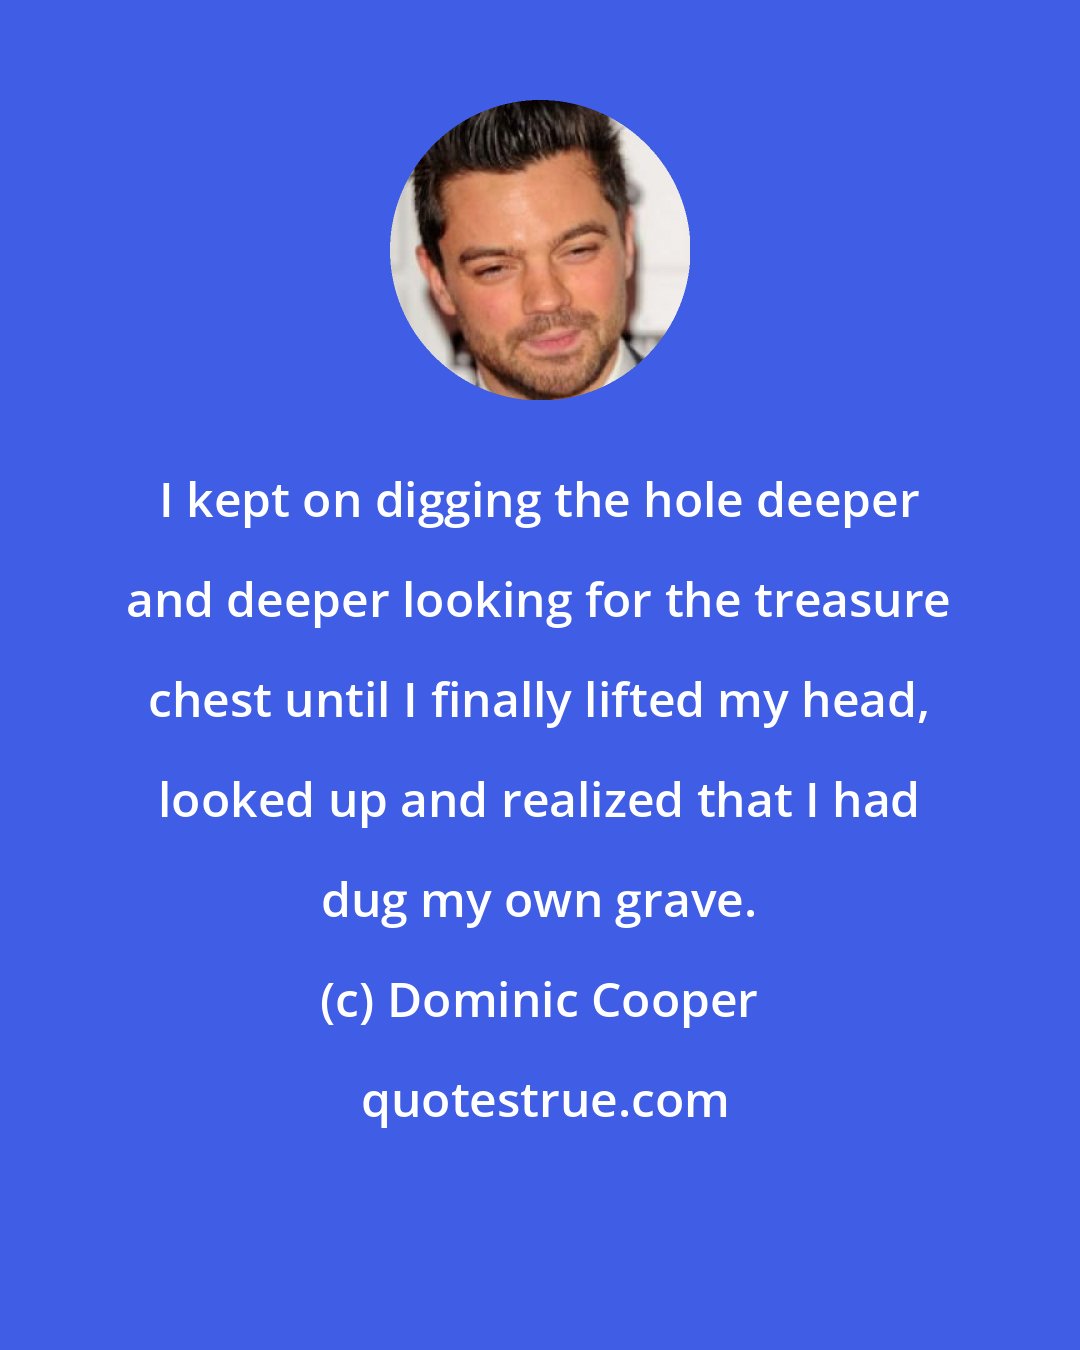 Dominic Cooper: I kept on digging the hole deeper and deeper looking for the treasure chest until I finally lifted my head, looked up and realized that I had dug my own grave.